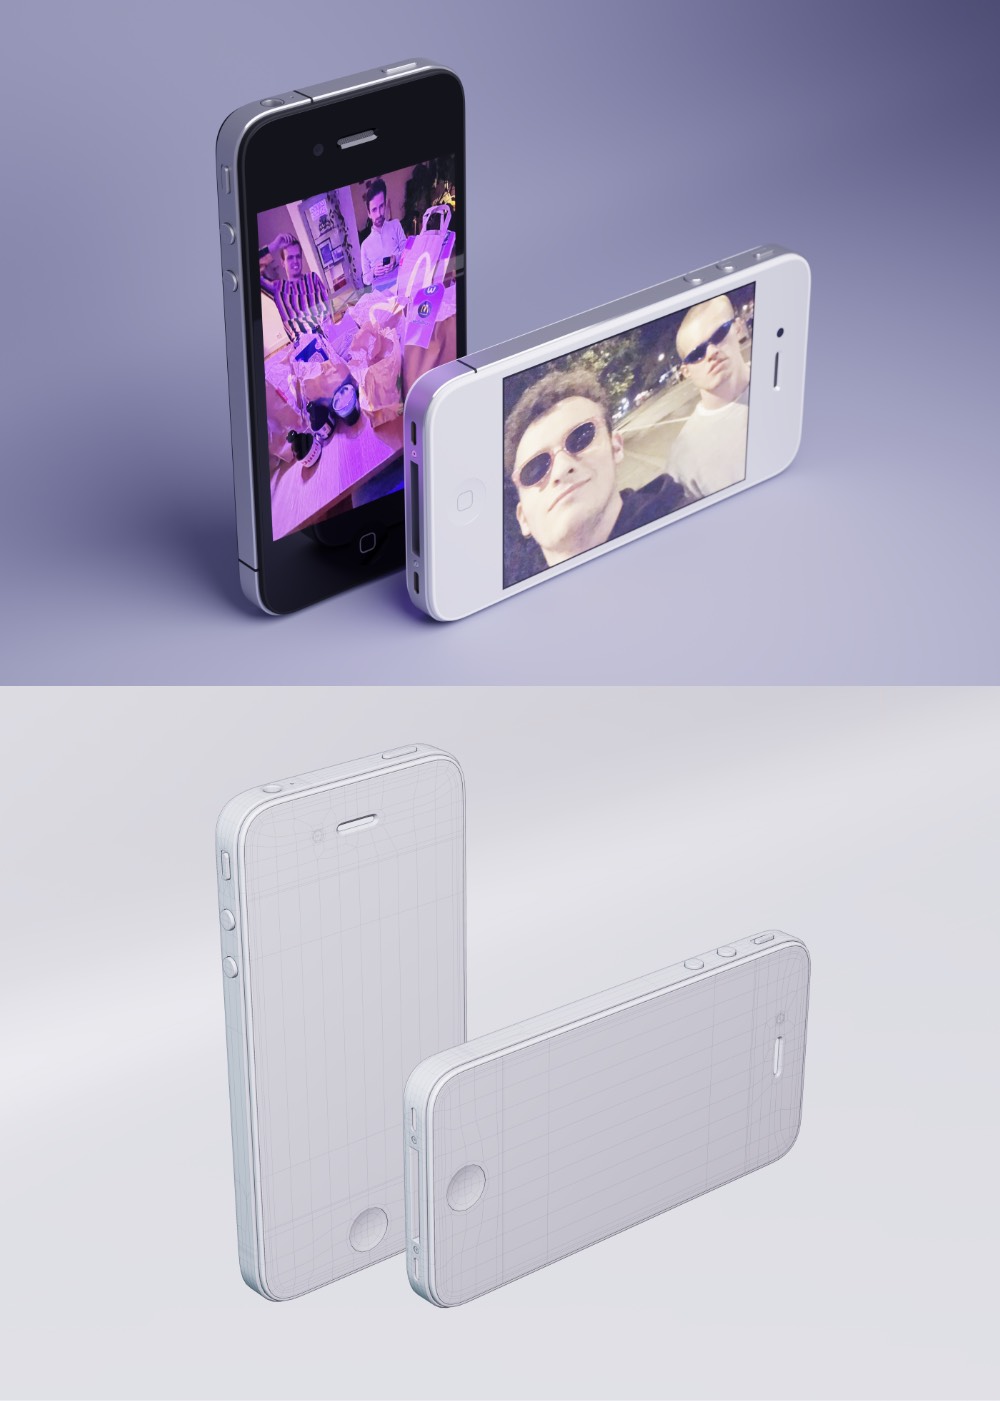 3D iPhone 4 model by Tom Claus